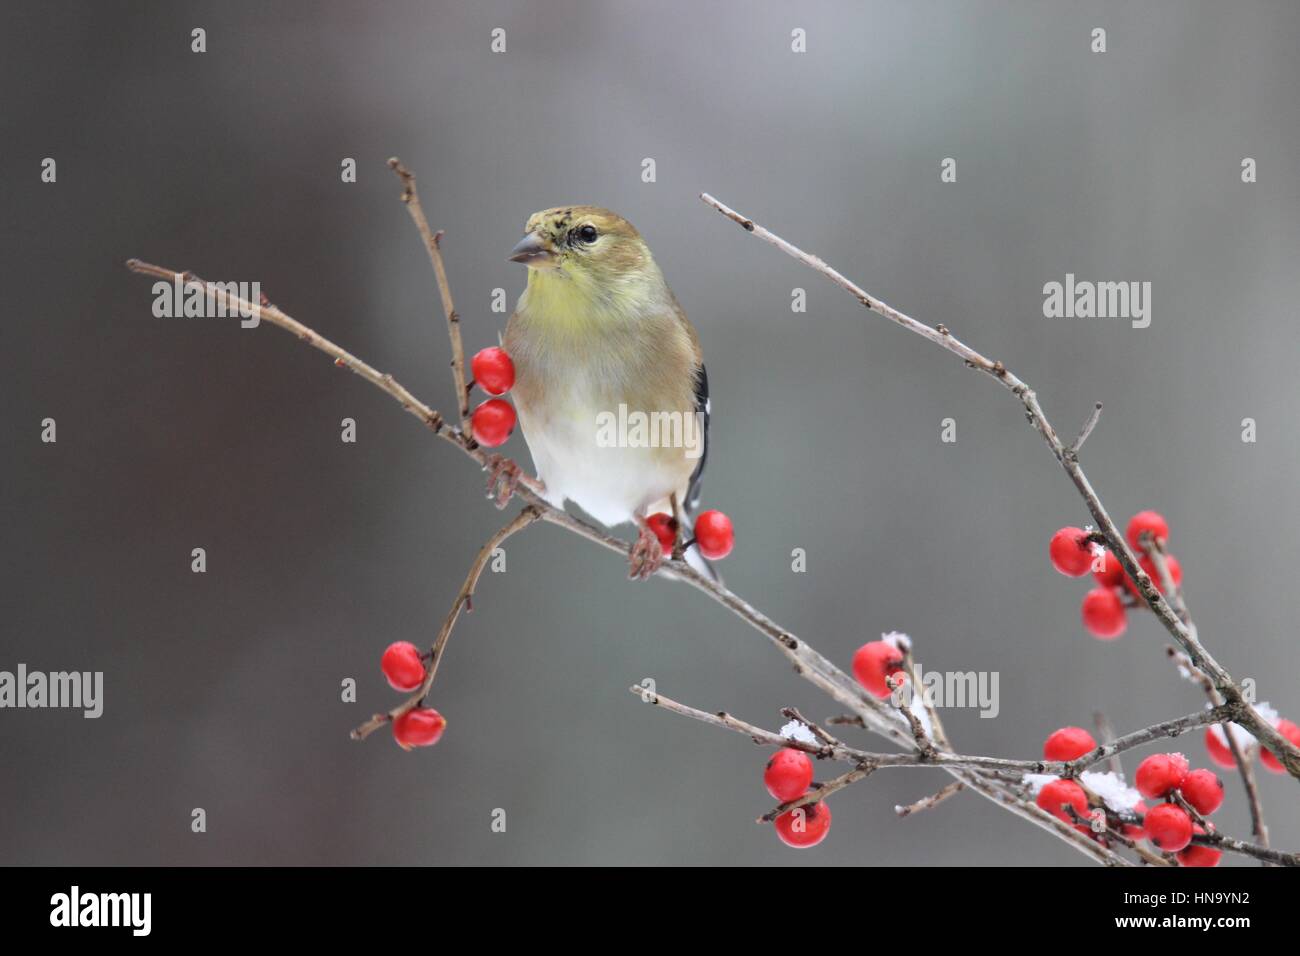 An American goldfinch perching on red winter berries Stock Photo